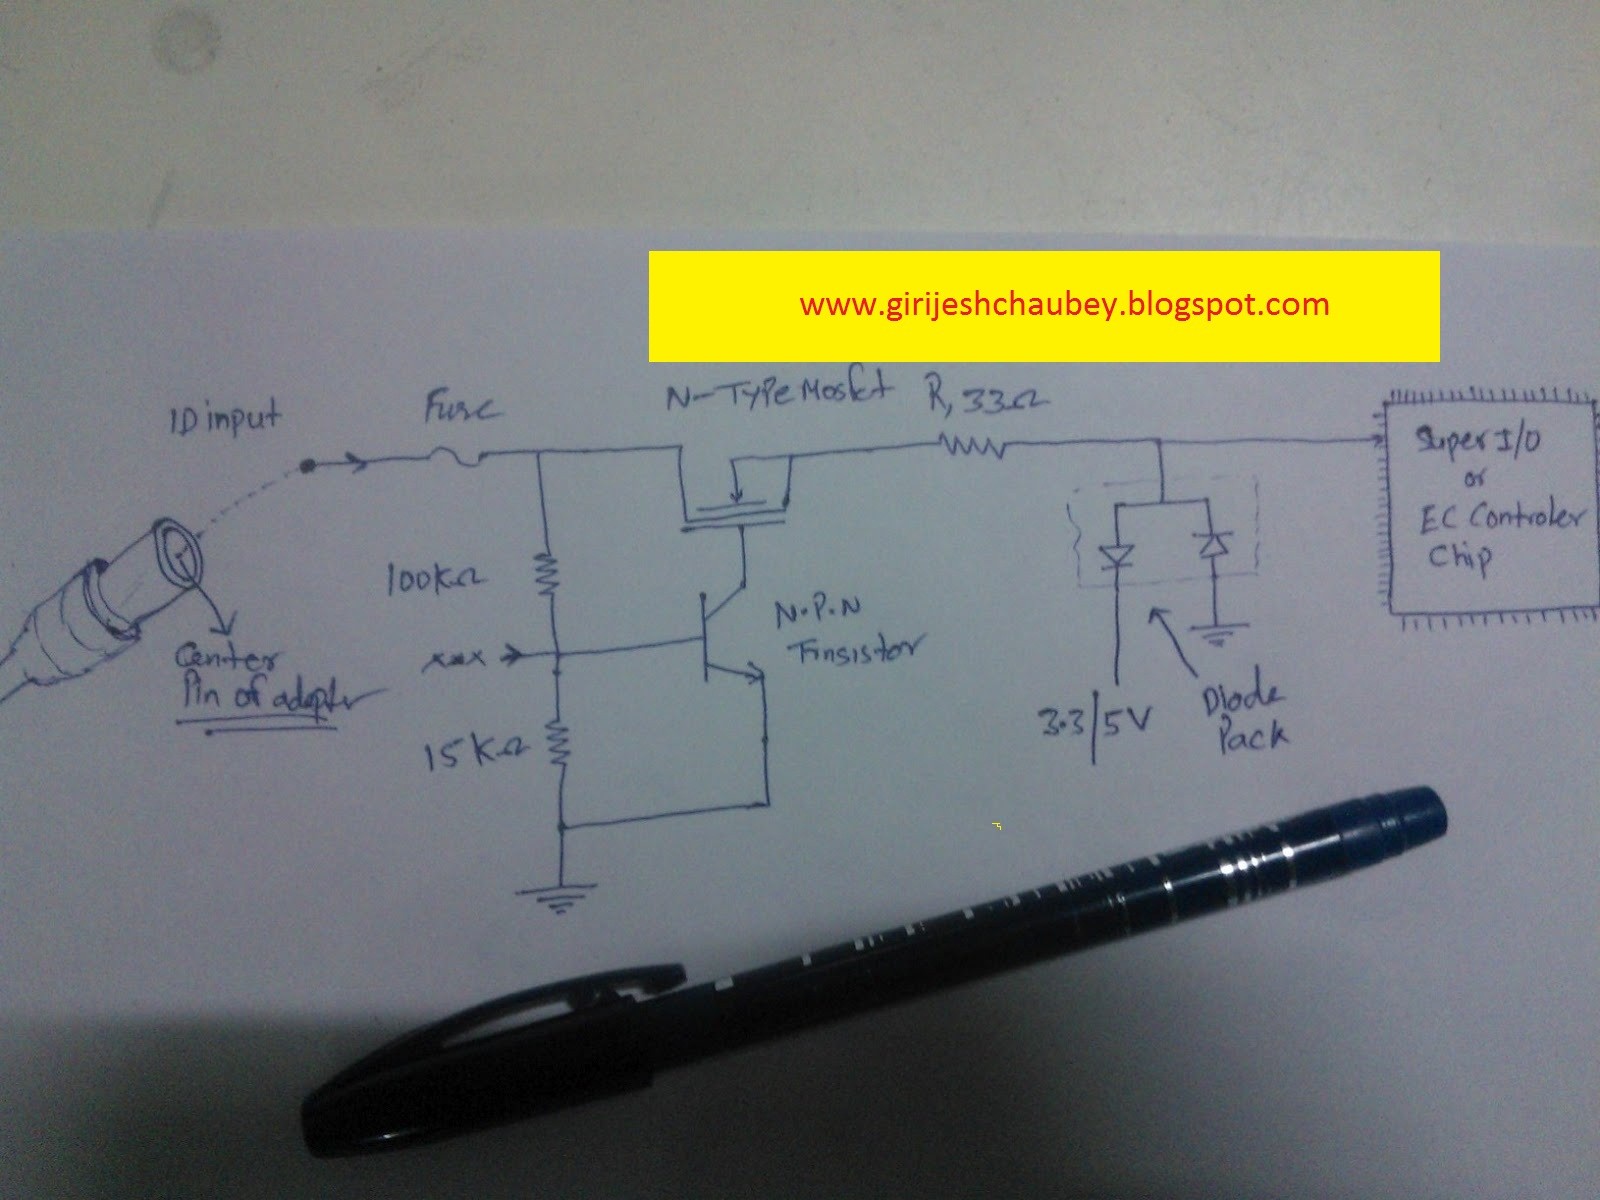 Lapkit 65w Laptop Chager Circuit Schematic Dell Studio Xps Pa 12 Charger Wiring Diagram Of Lapkit 65w Laptop Chager Circuit Schematic